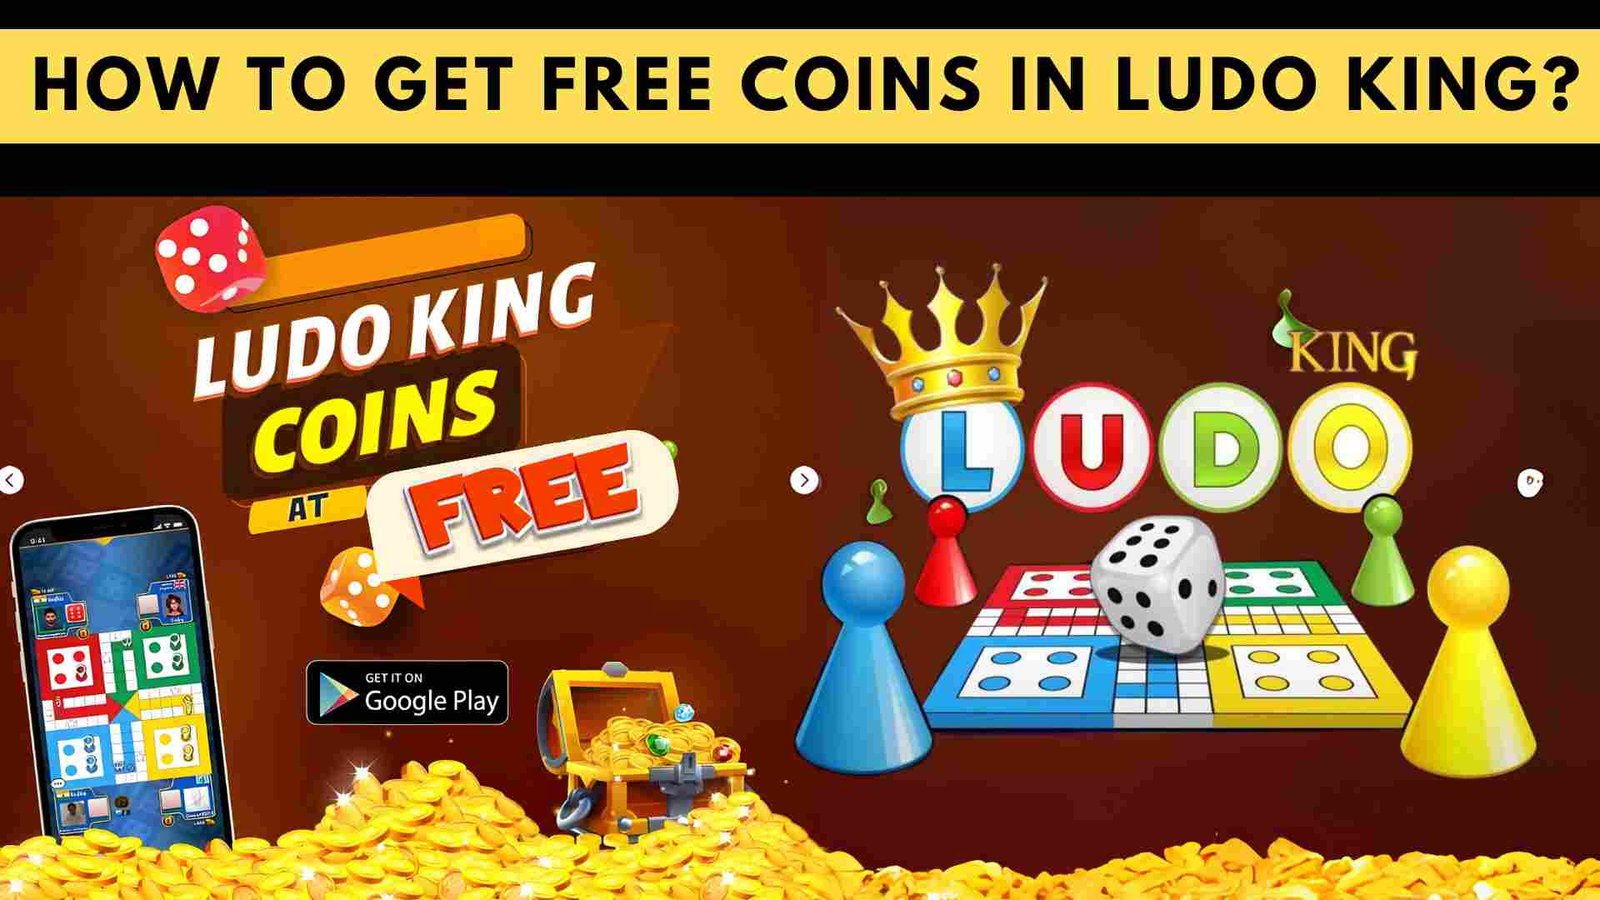 Free Coins in Ludo King